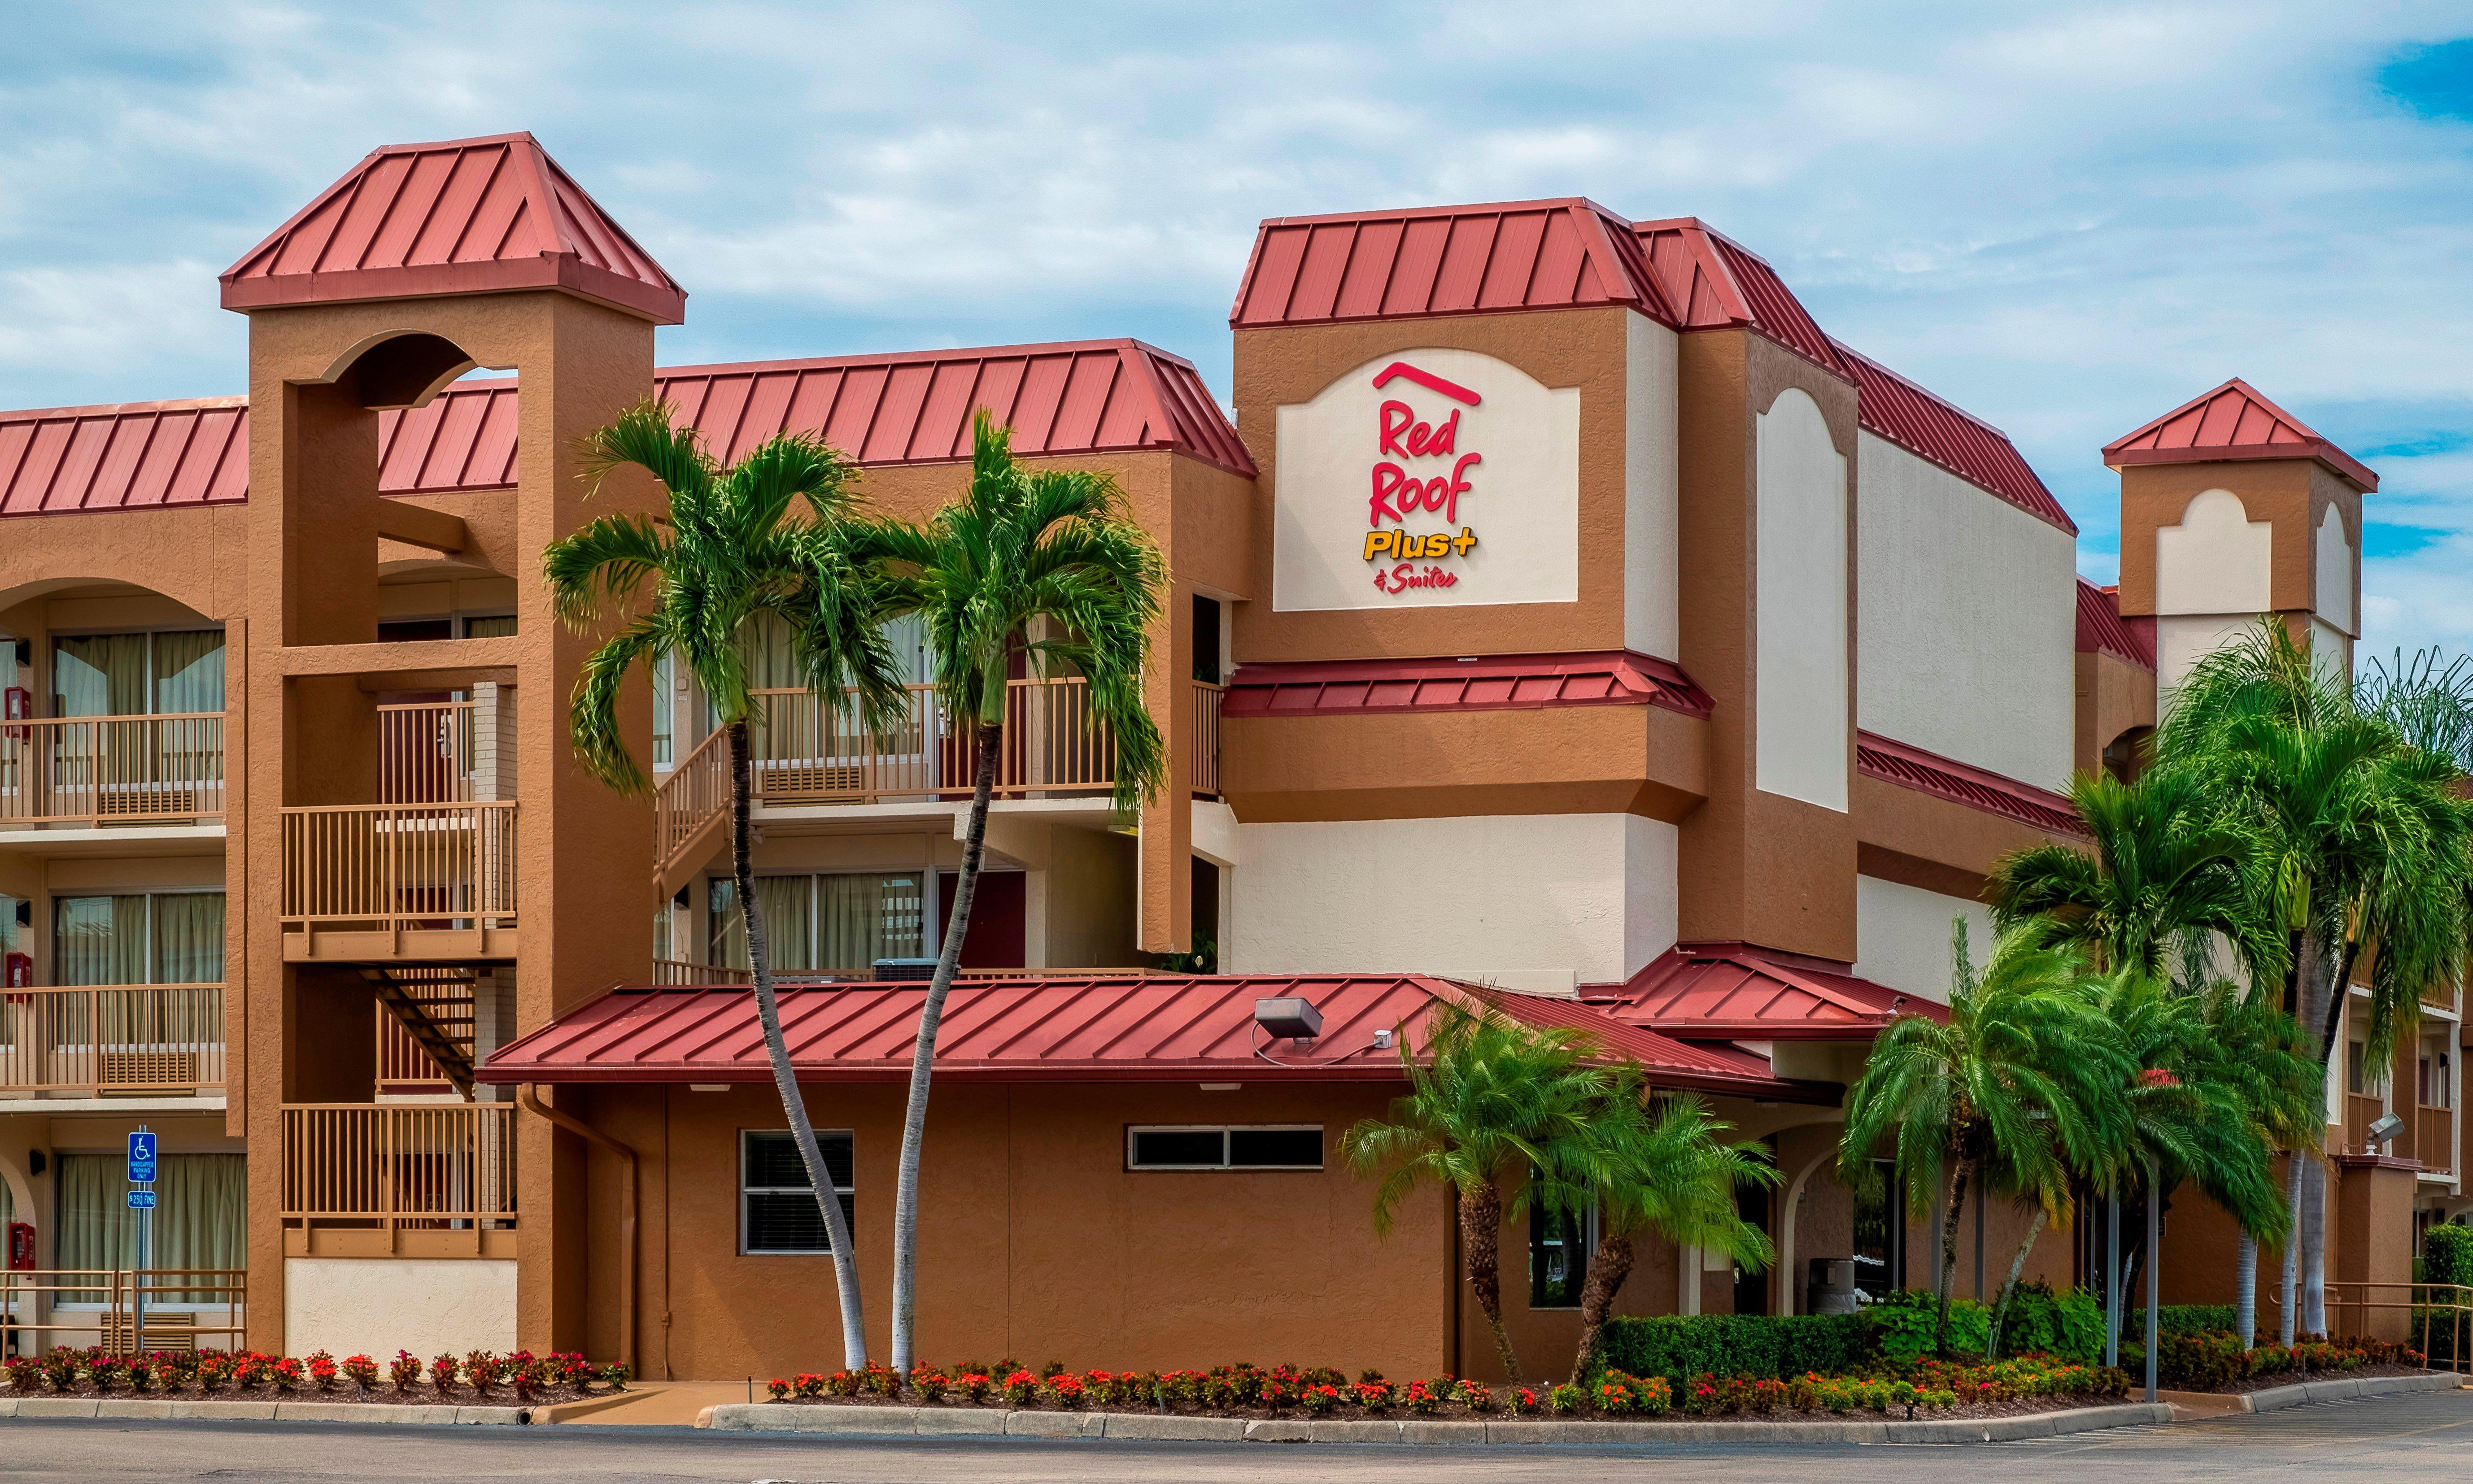 HOTEL RED ROOF INN & SUITES NAPLES DOWNTOWN-5TH AVE S NAPLES, FL 3* (United States) - from US$ 100 | BOOKED